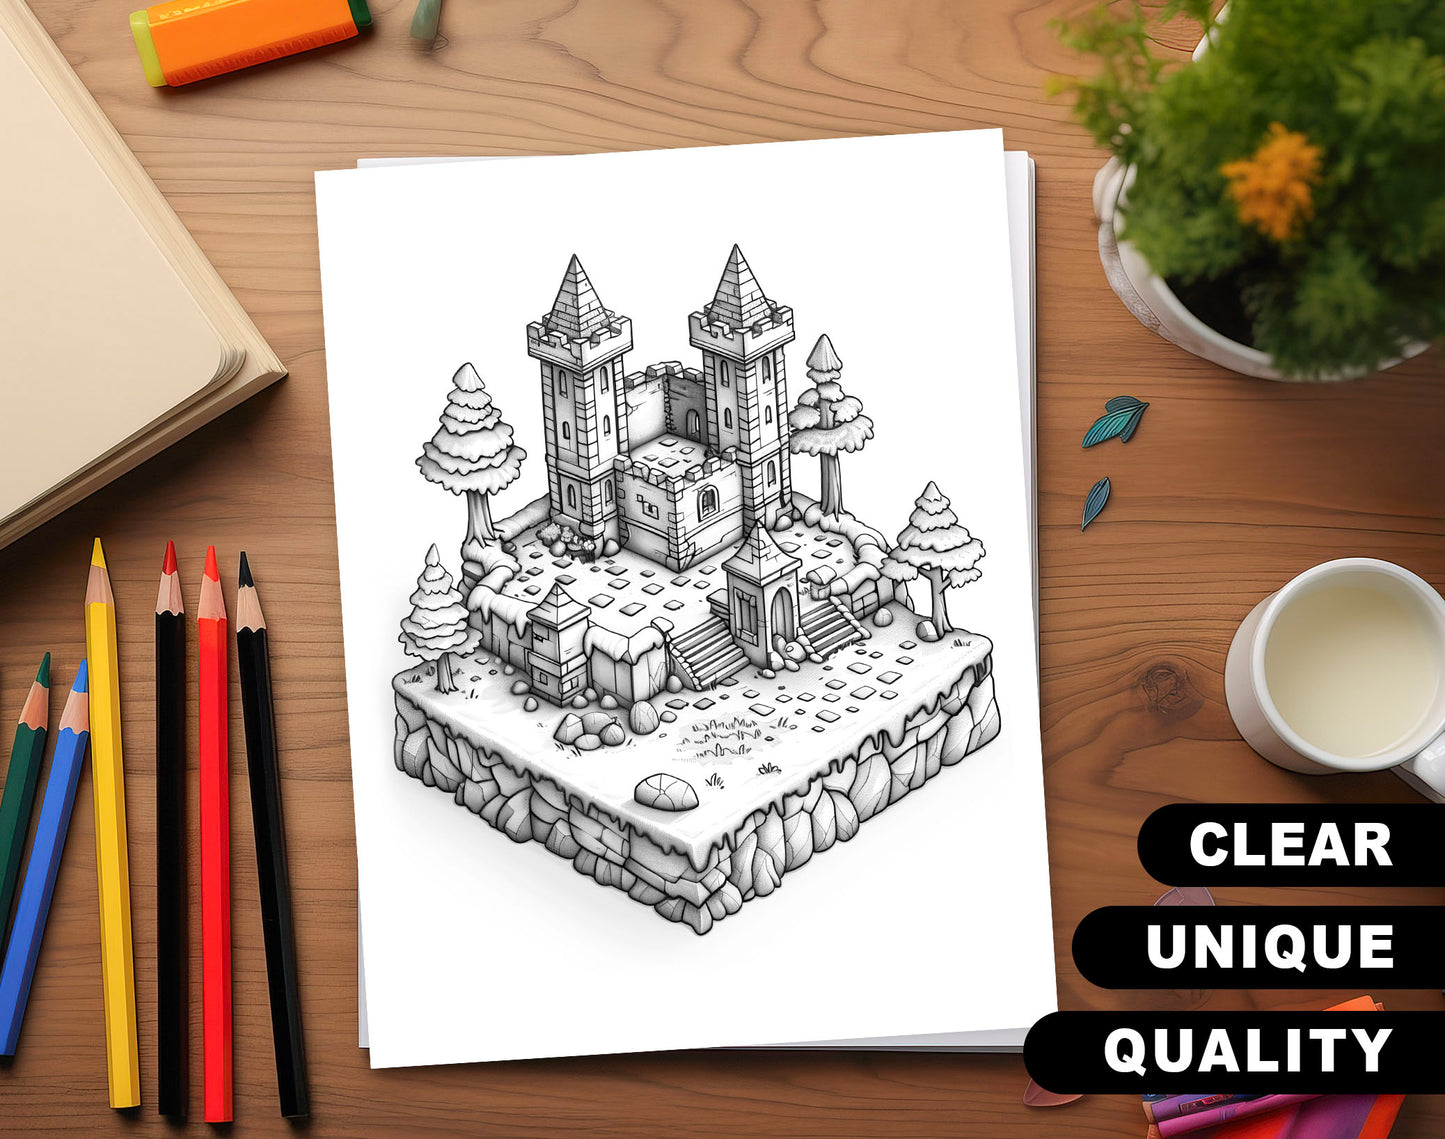 70 Diverse 3D Object Grayscale Coloring Pages - Instant Download - Printable PDF Dark/Light